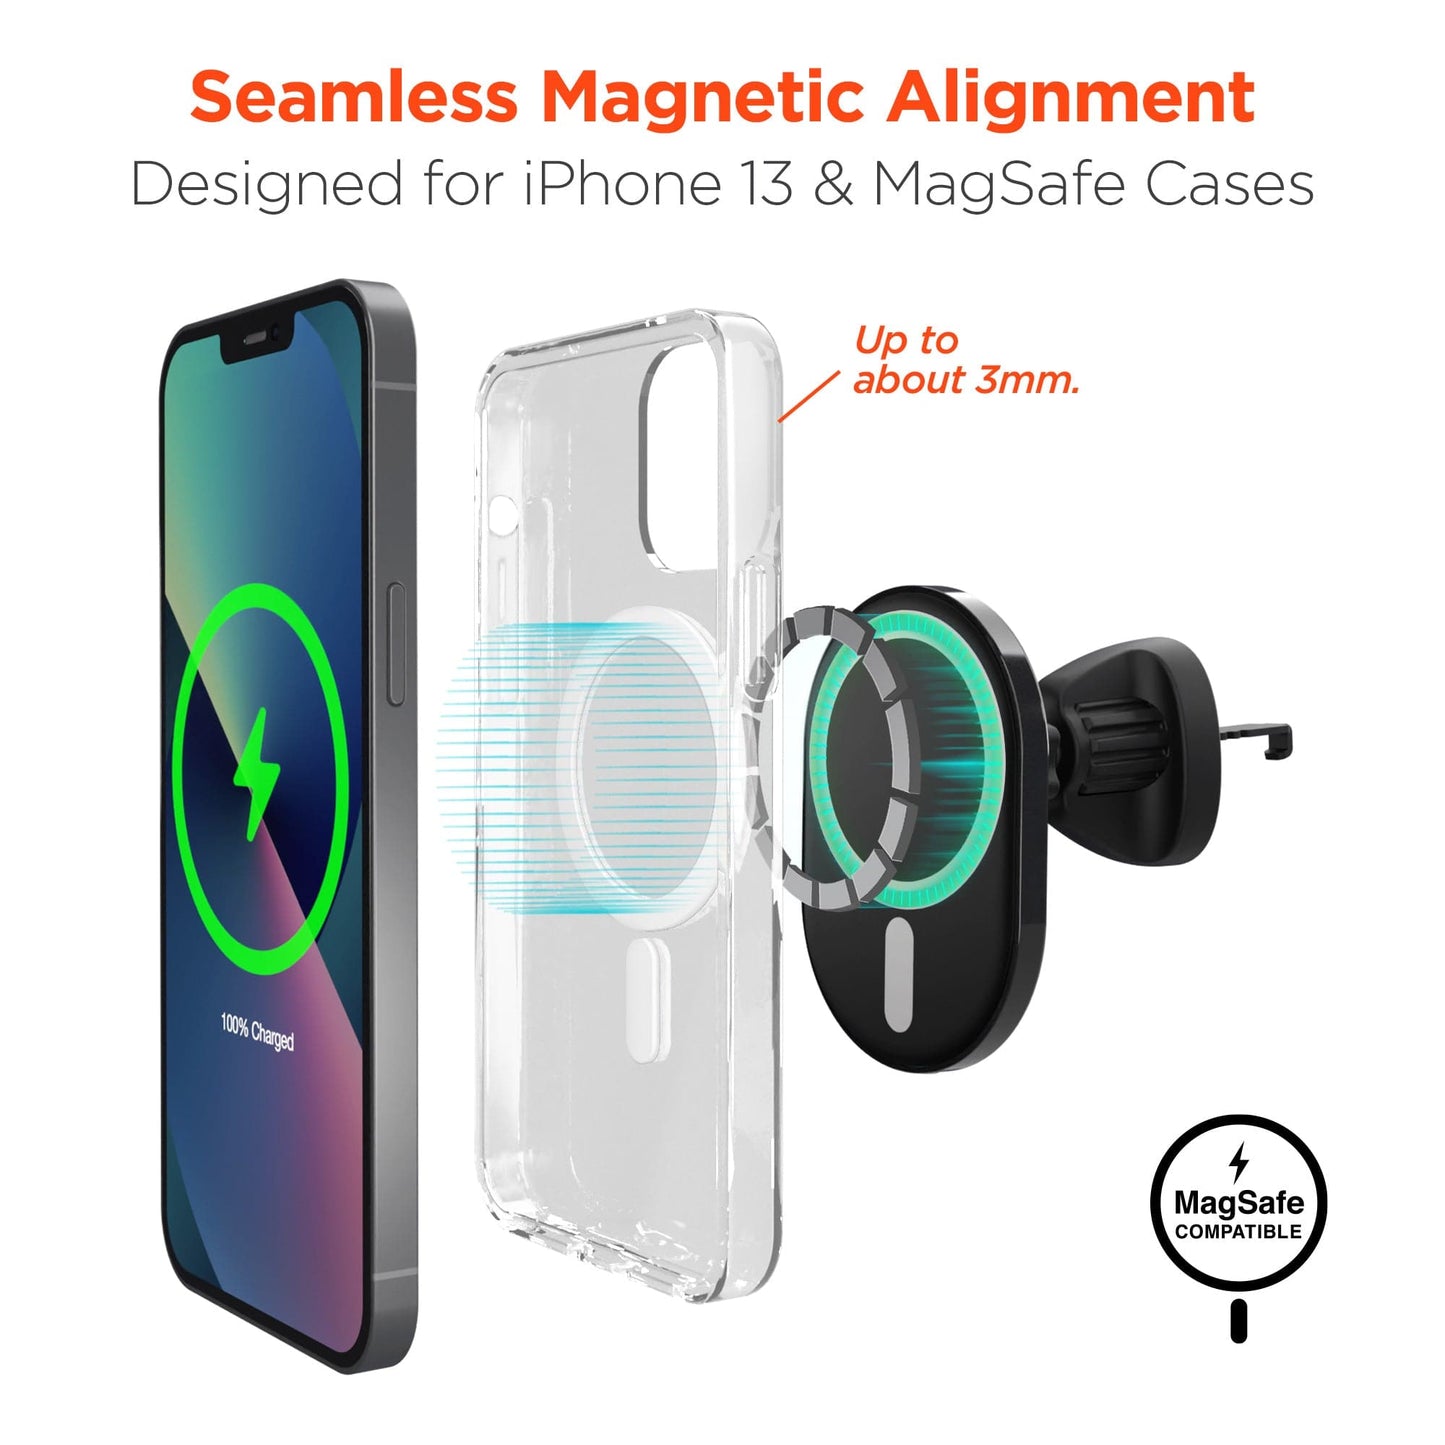 HyperGear MagVent 15W Wireless Charging Mount